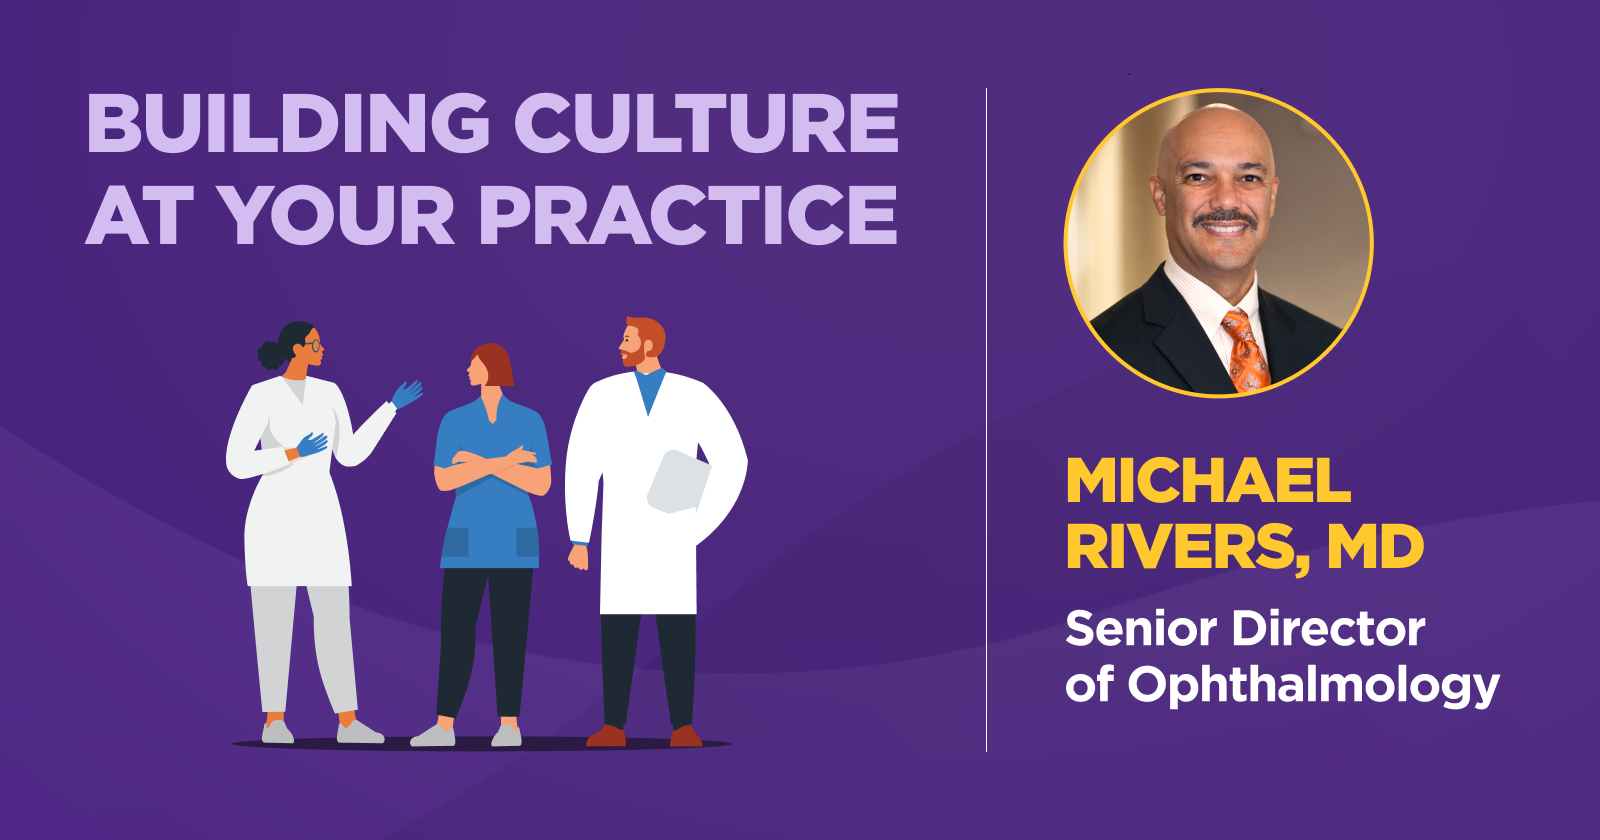 Our Senior Medical Director of Ophthalmology Says If You Want to Reduce Attrition, Build Culture